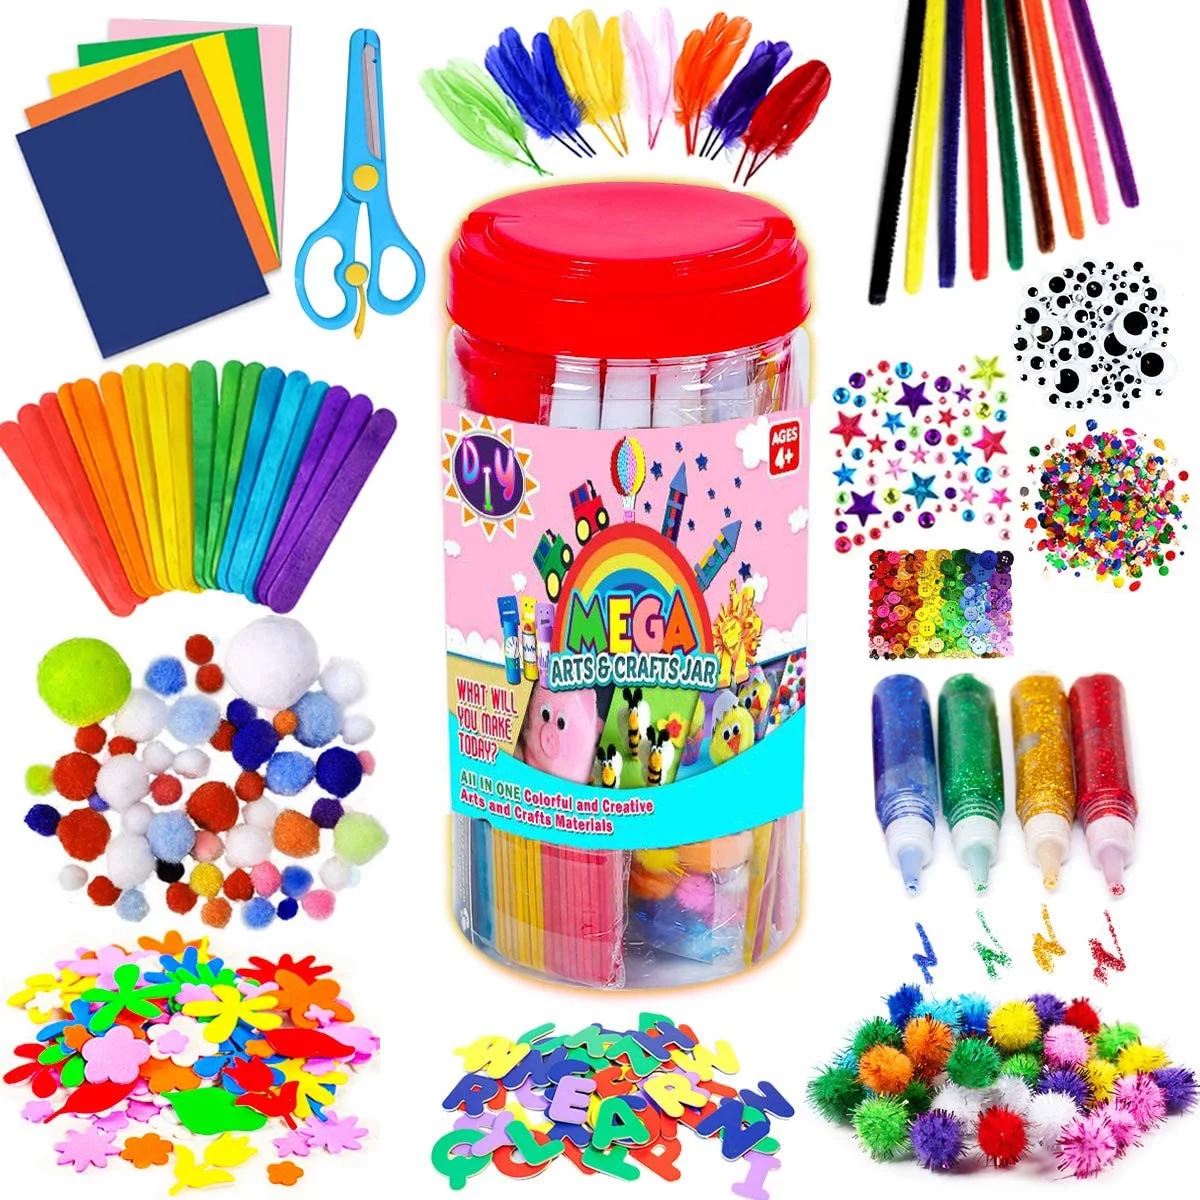 Arts and Crafts Supplies Kit for Kids - Boys and Girls Age 4 5 6 7